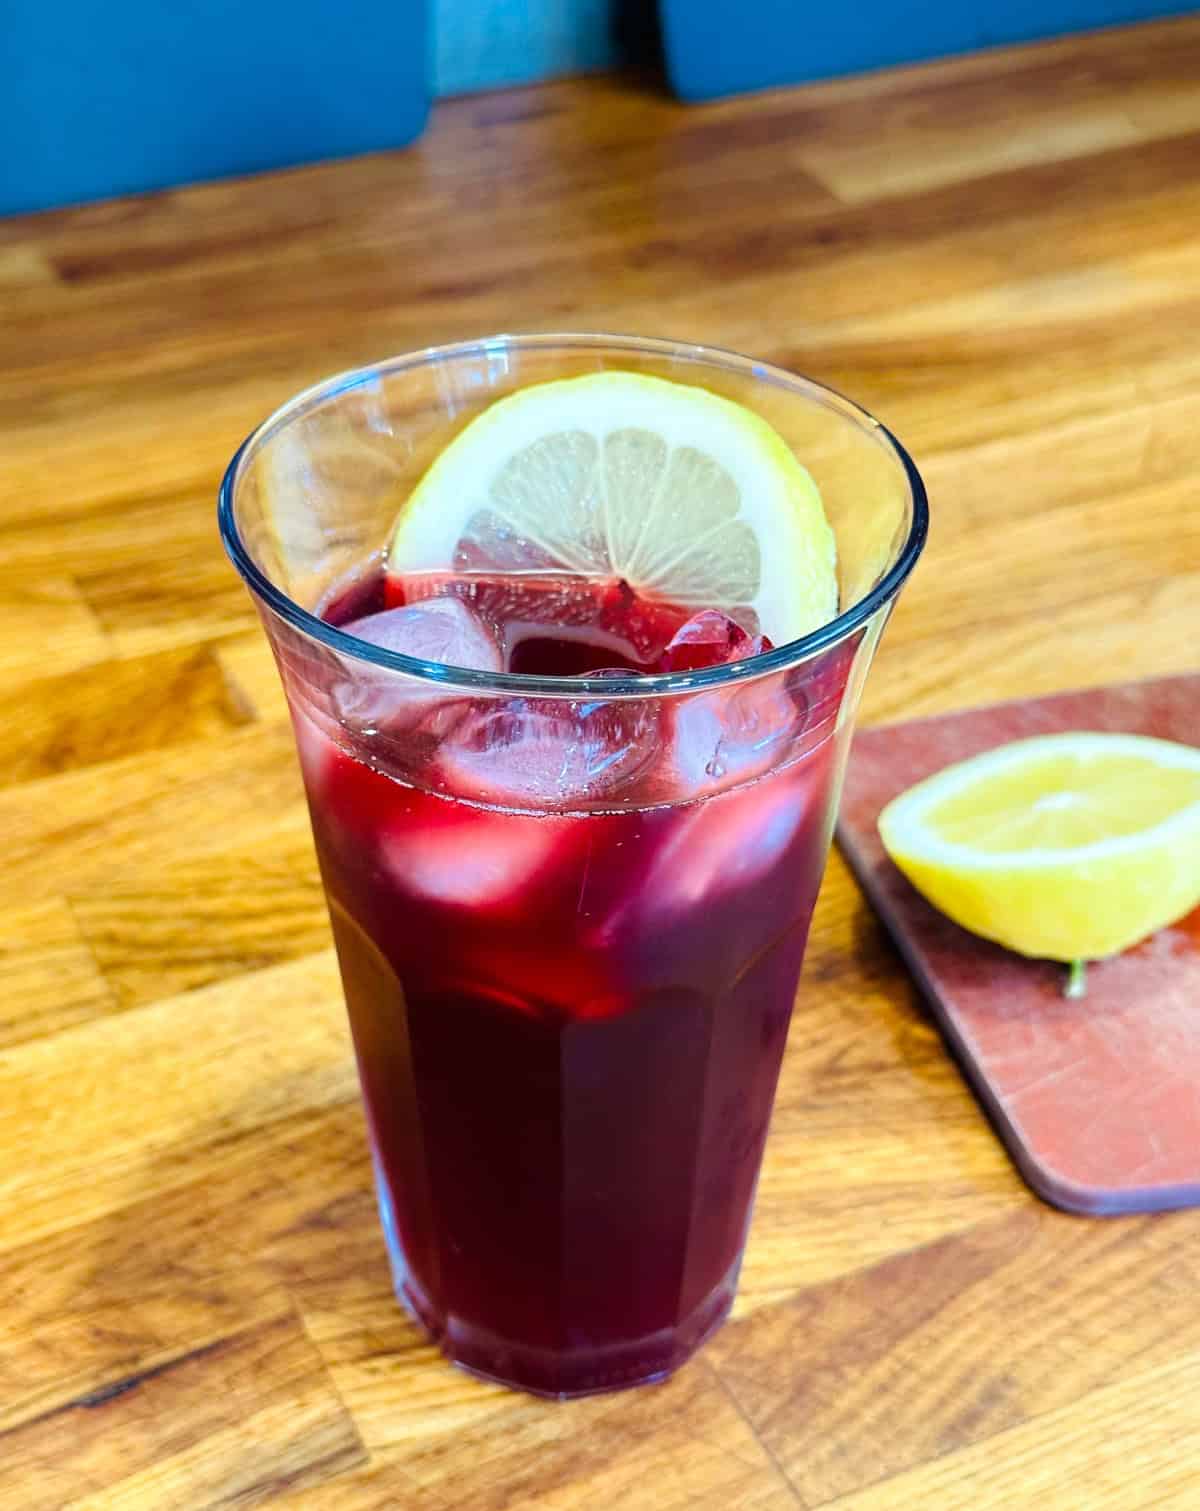 Tall glass of tinto de verano garnished with lemon slices.